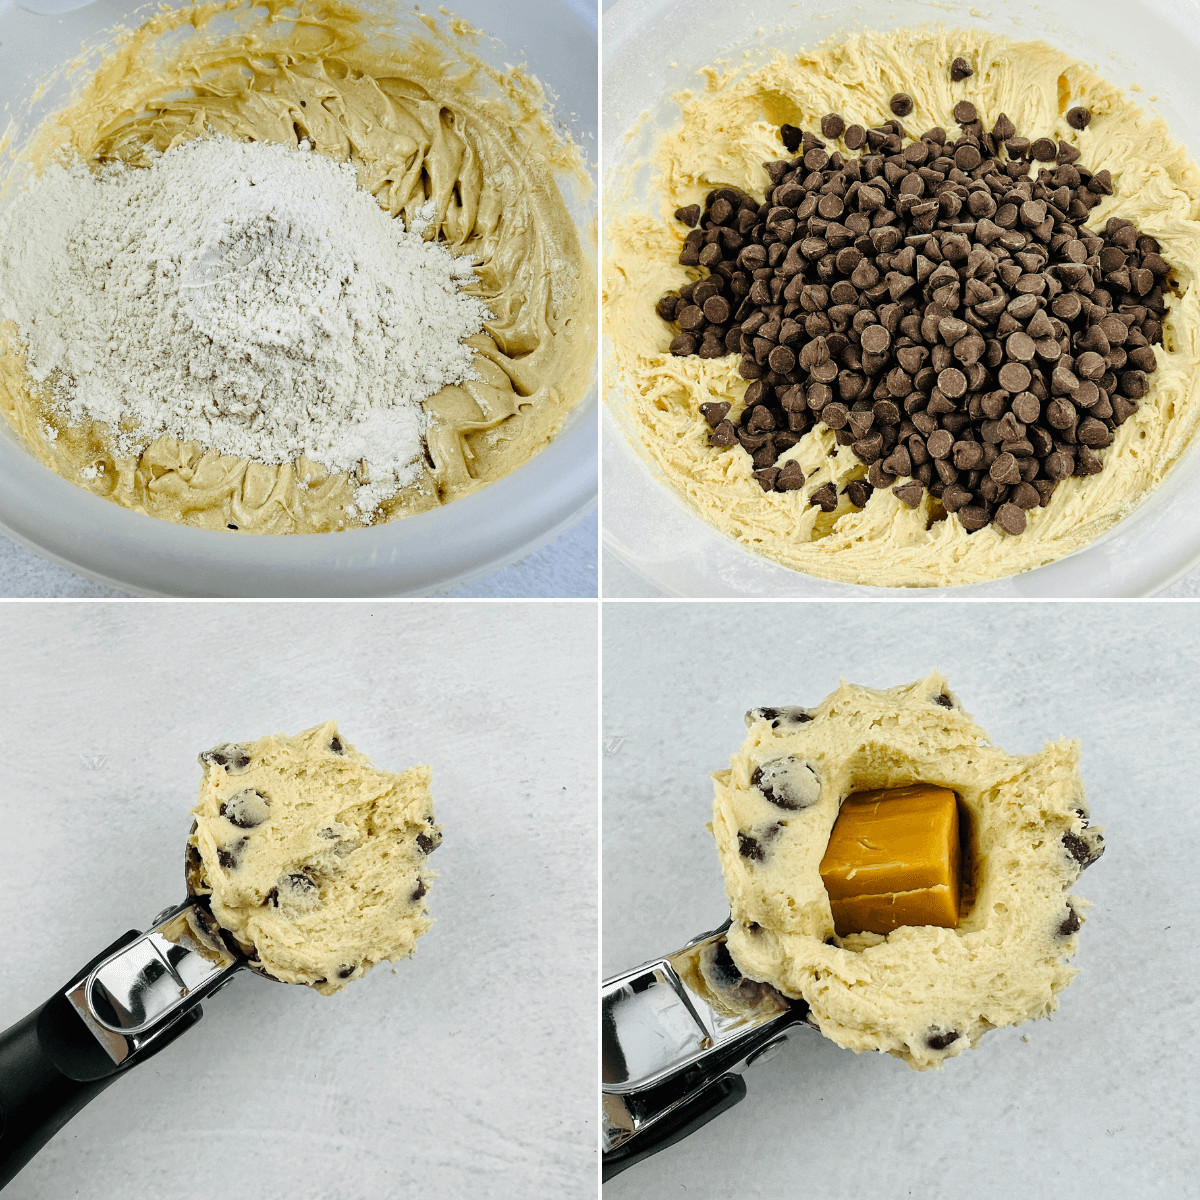 Adding the chocolate and the caramel to the dough.